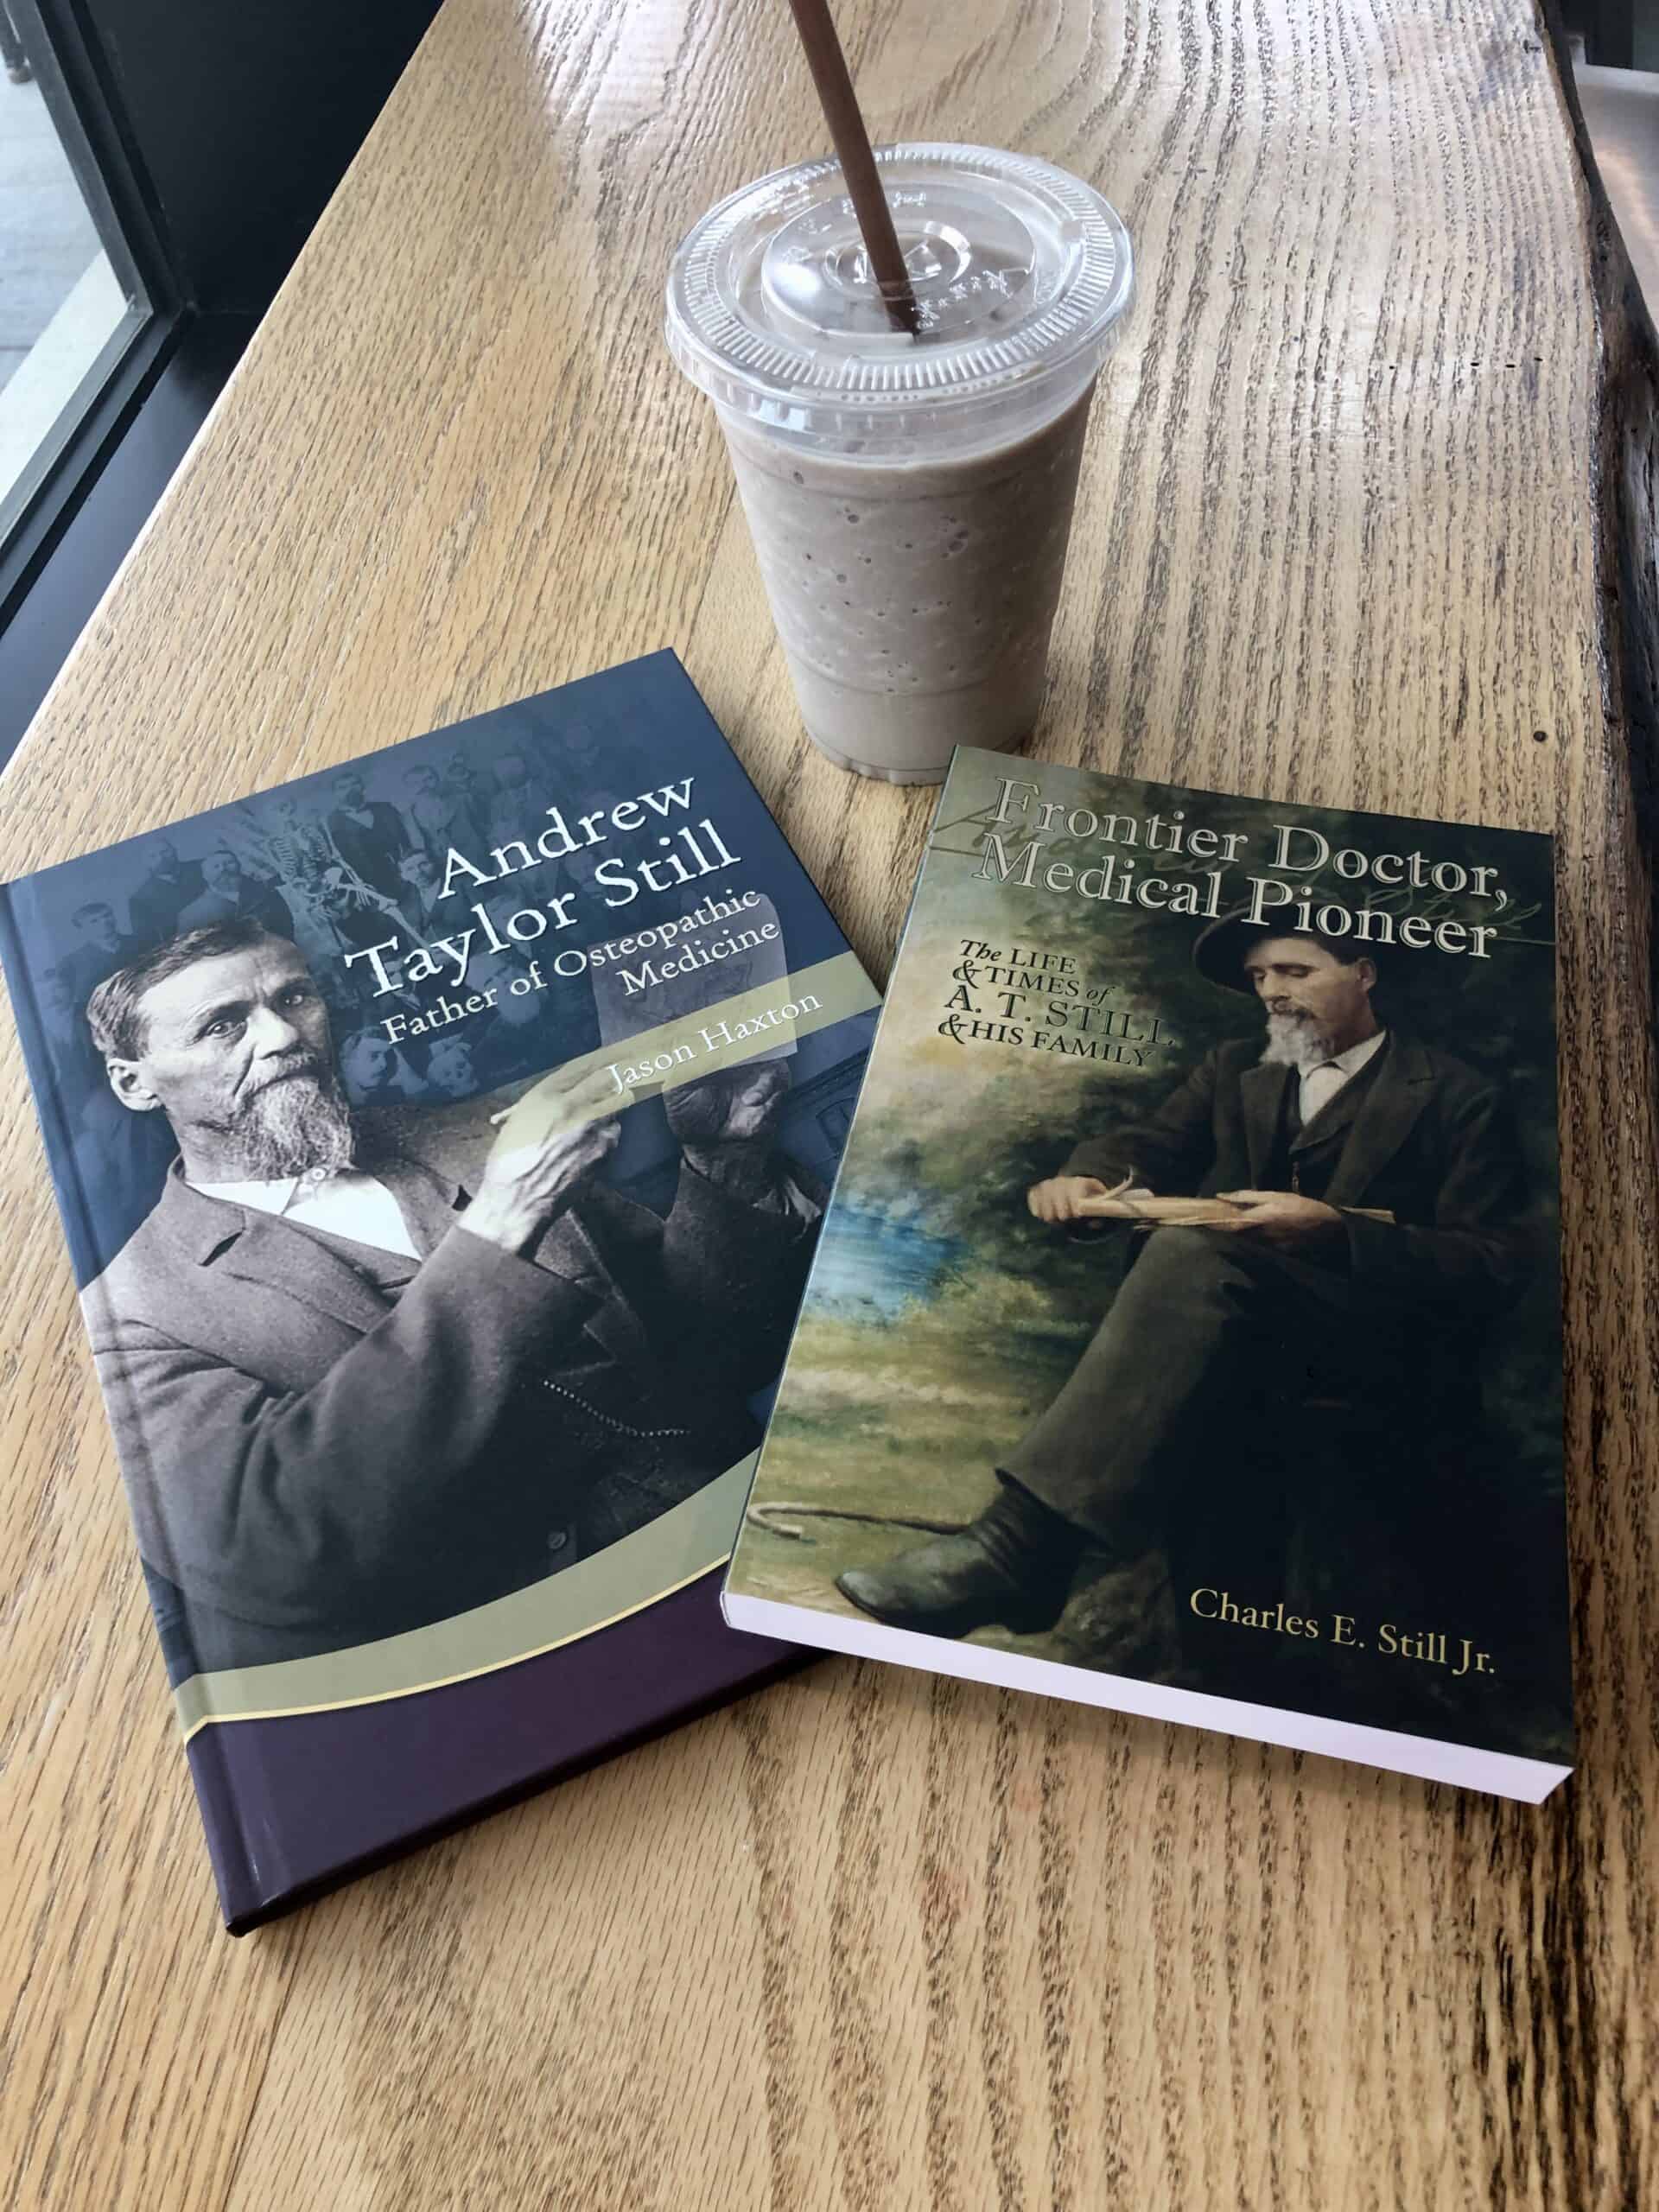 2 books written about the founder of Osteopathy